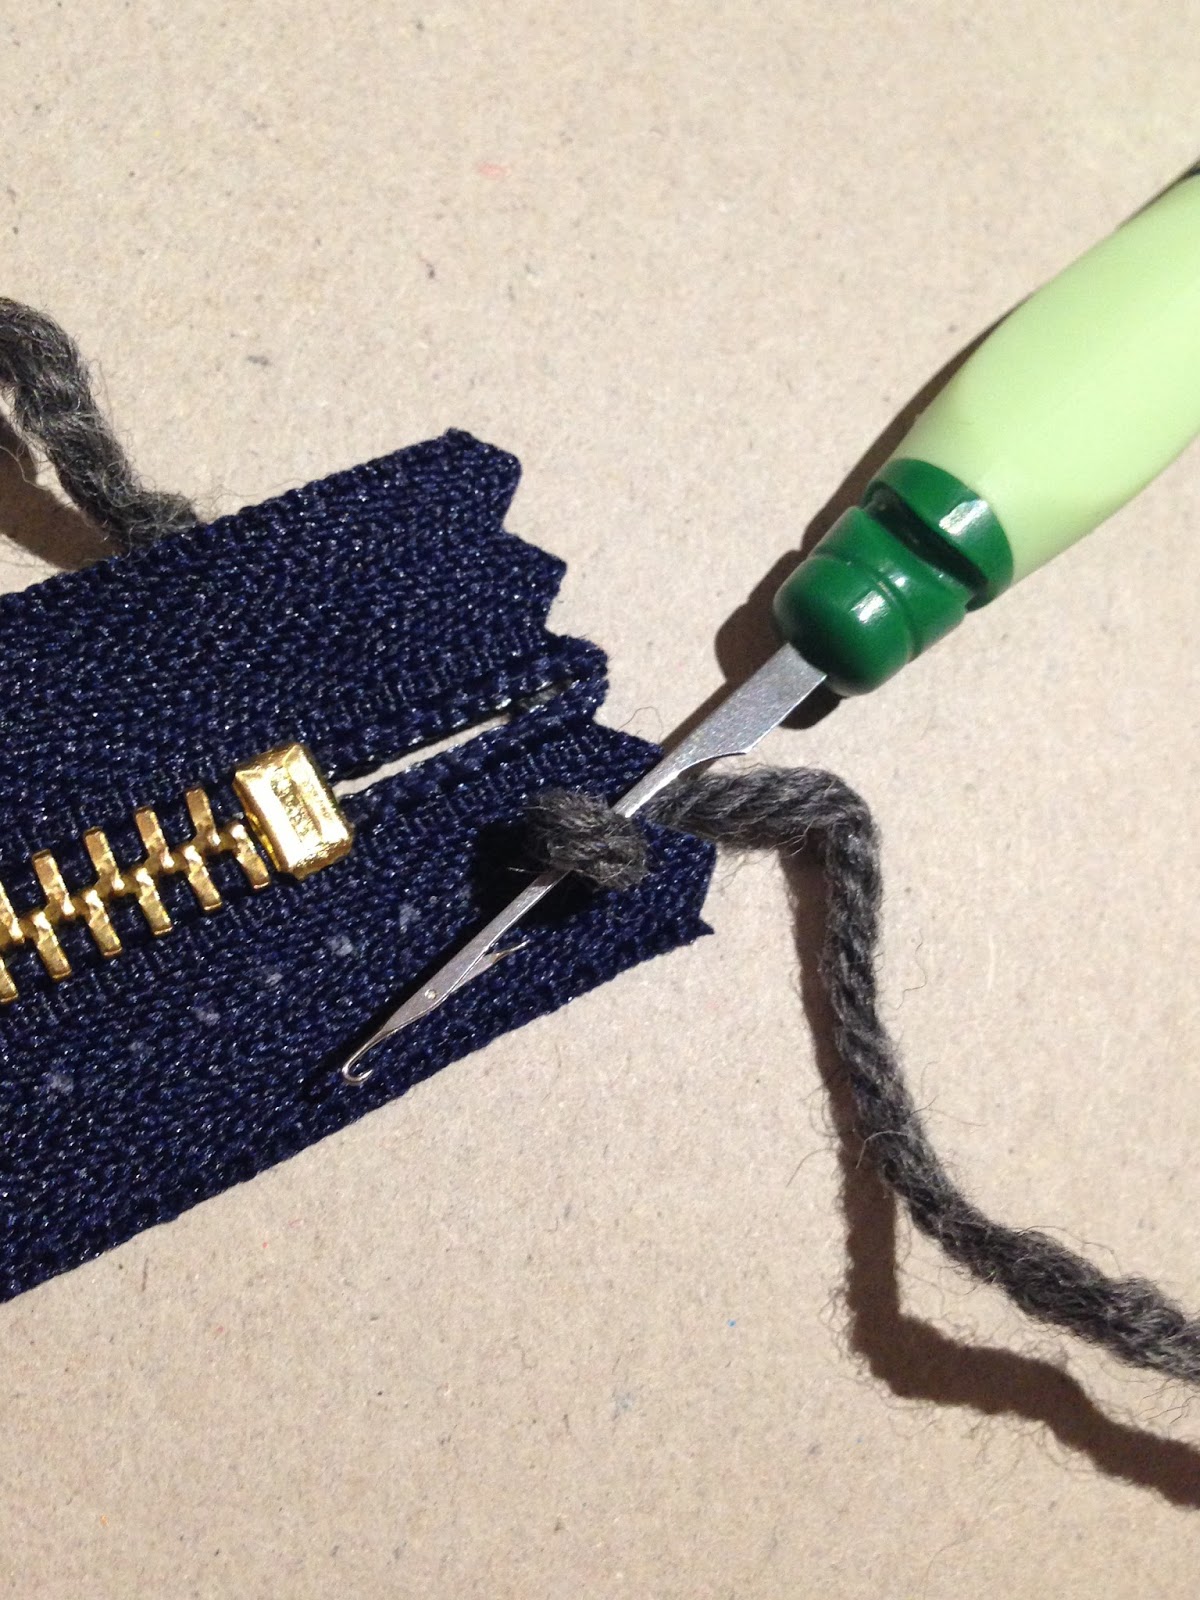 Using the Knit Picker 